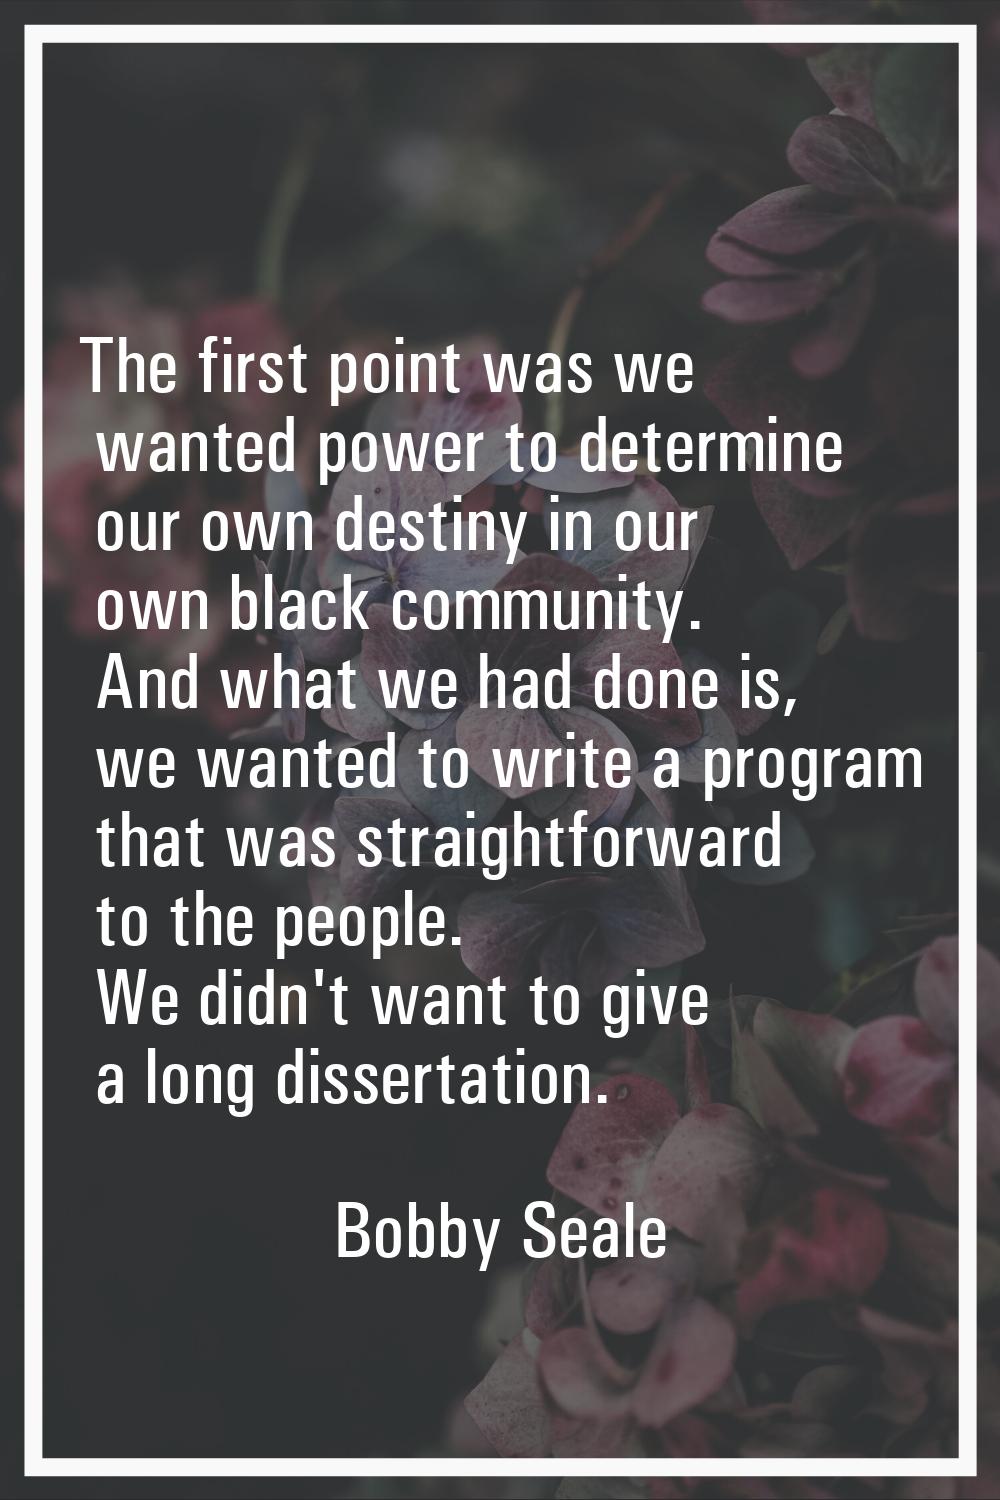 The first point was we wanted power to determine our own destiny in our own black community. And wh